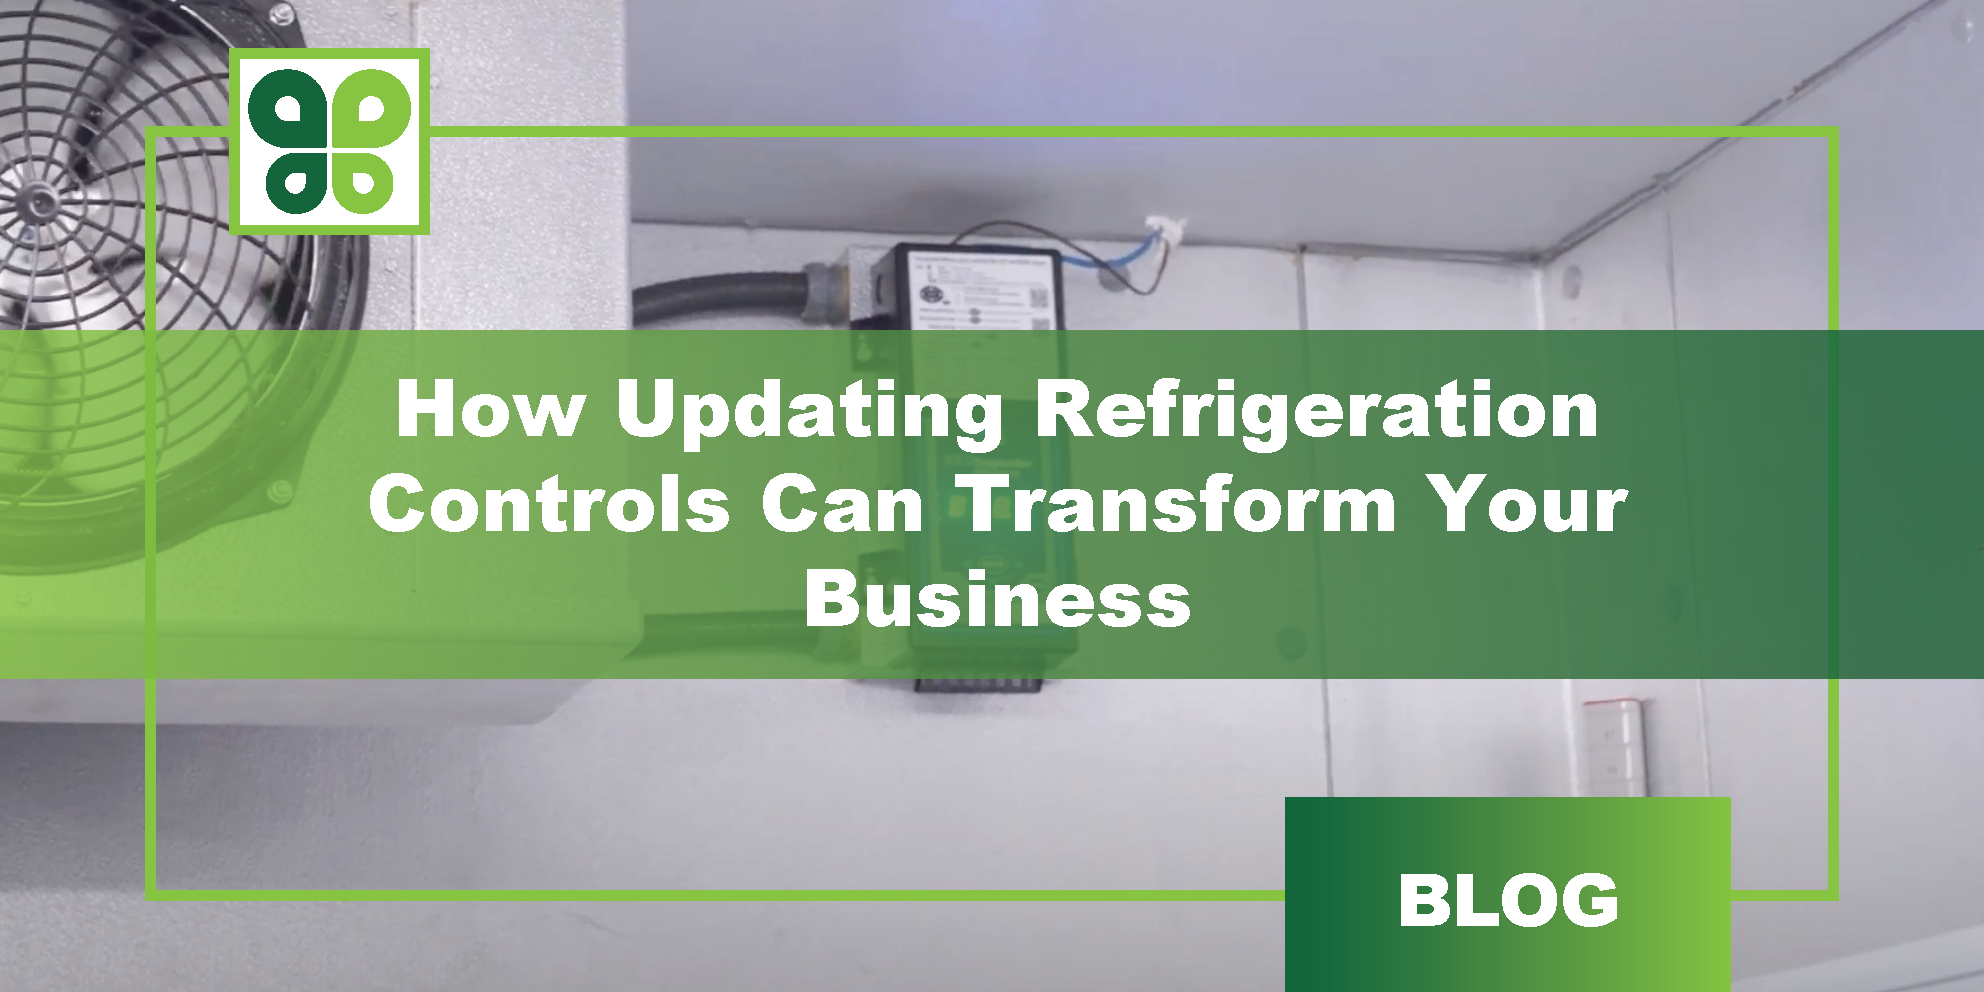 How Updating Refrigeration Controls Can Transform Your Business